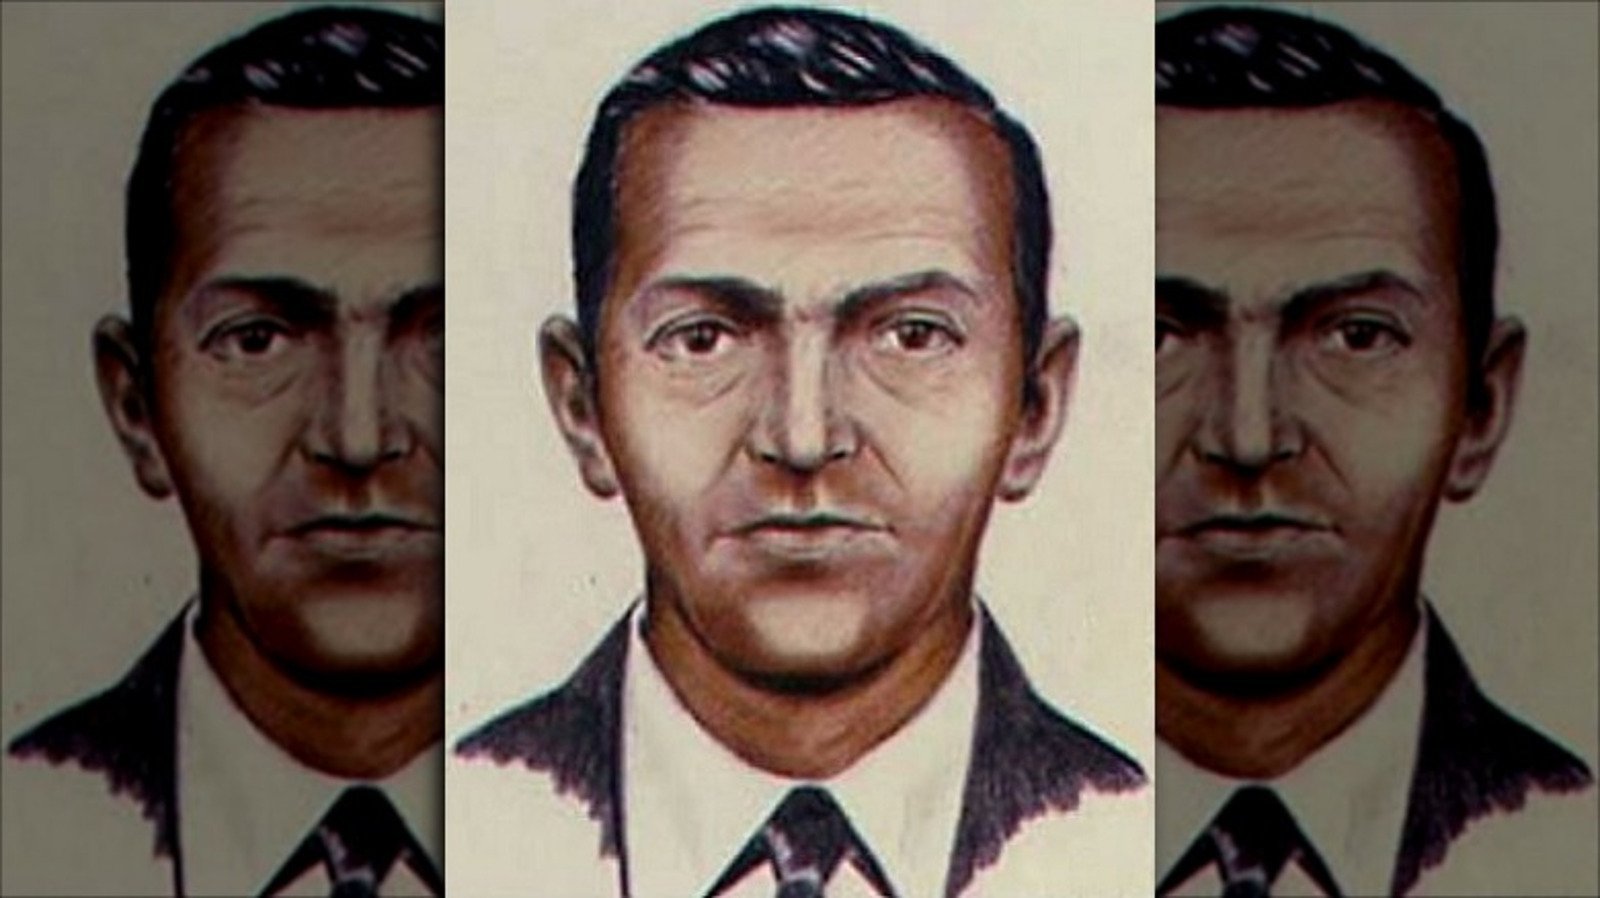 The Untold Truth Of The D.B Cooper Plane Hijacking